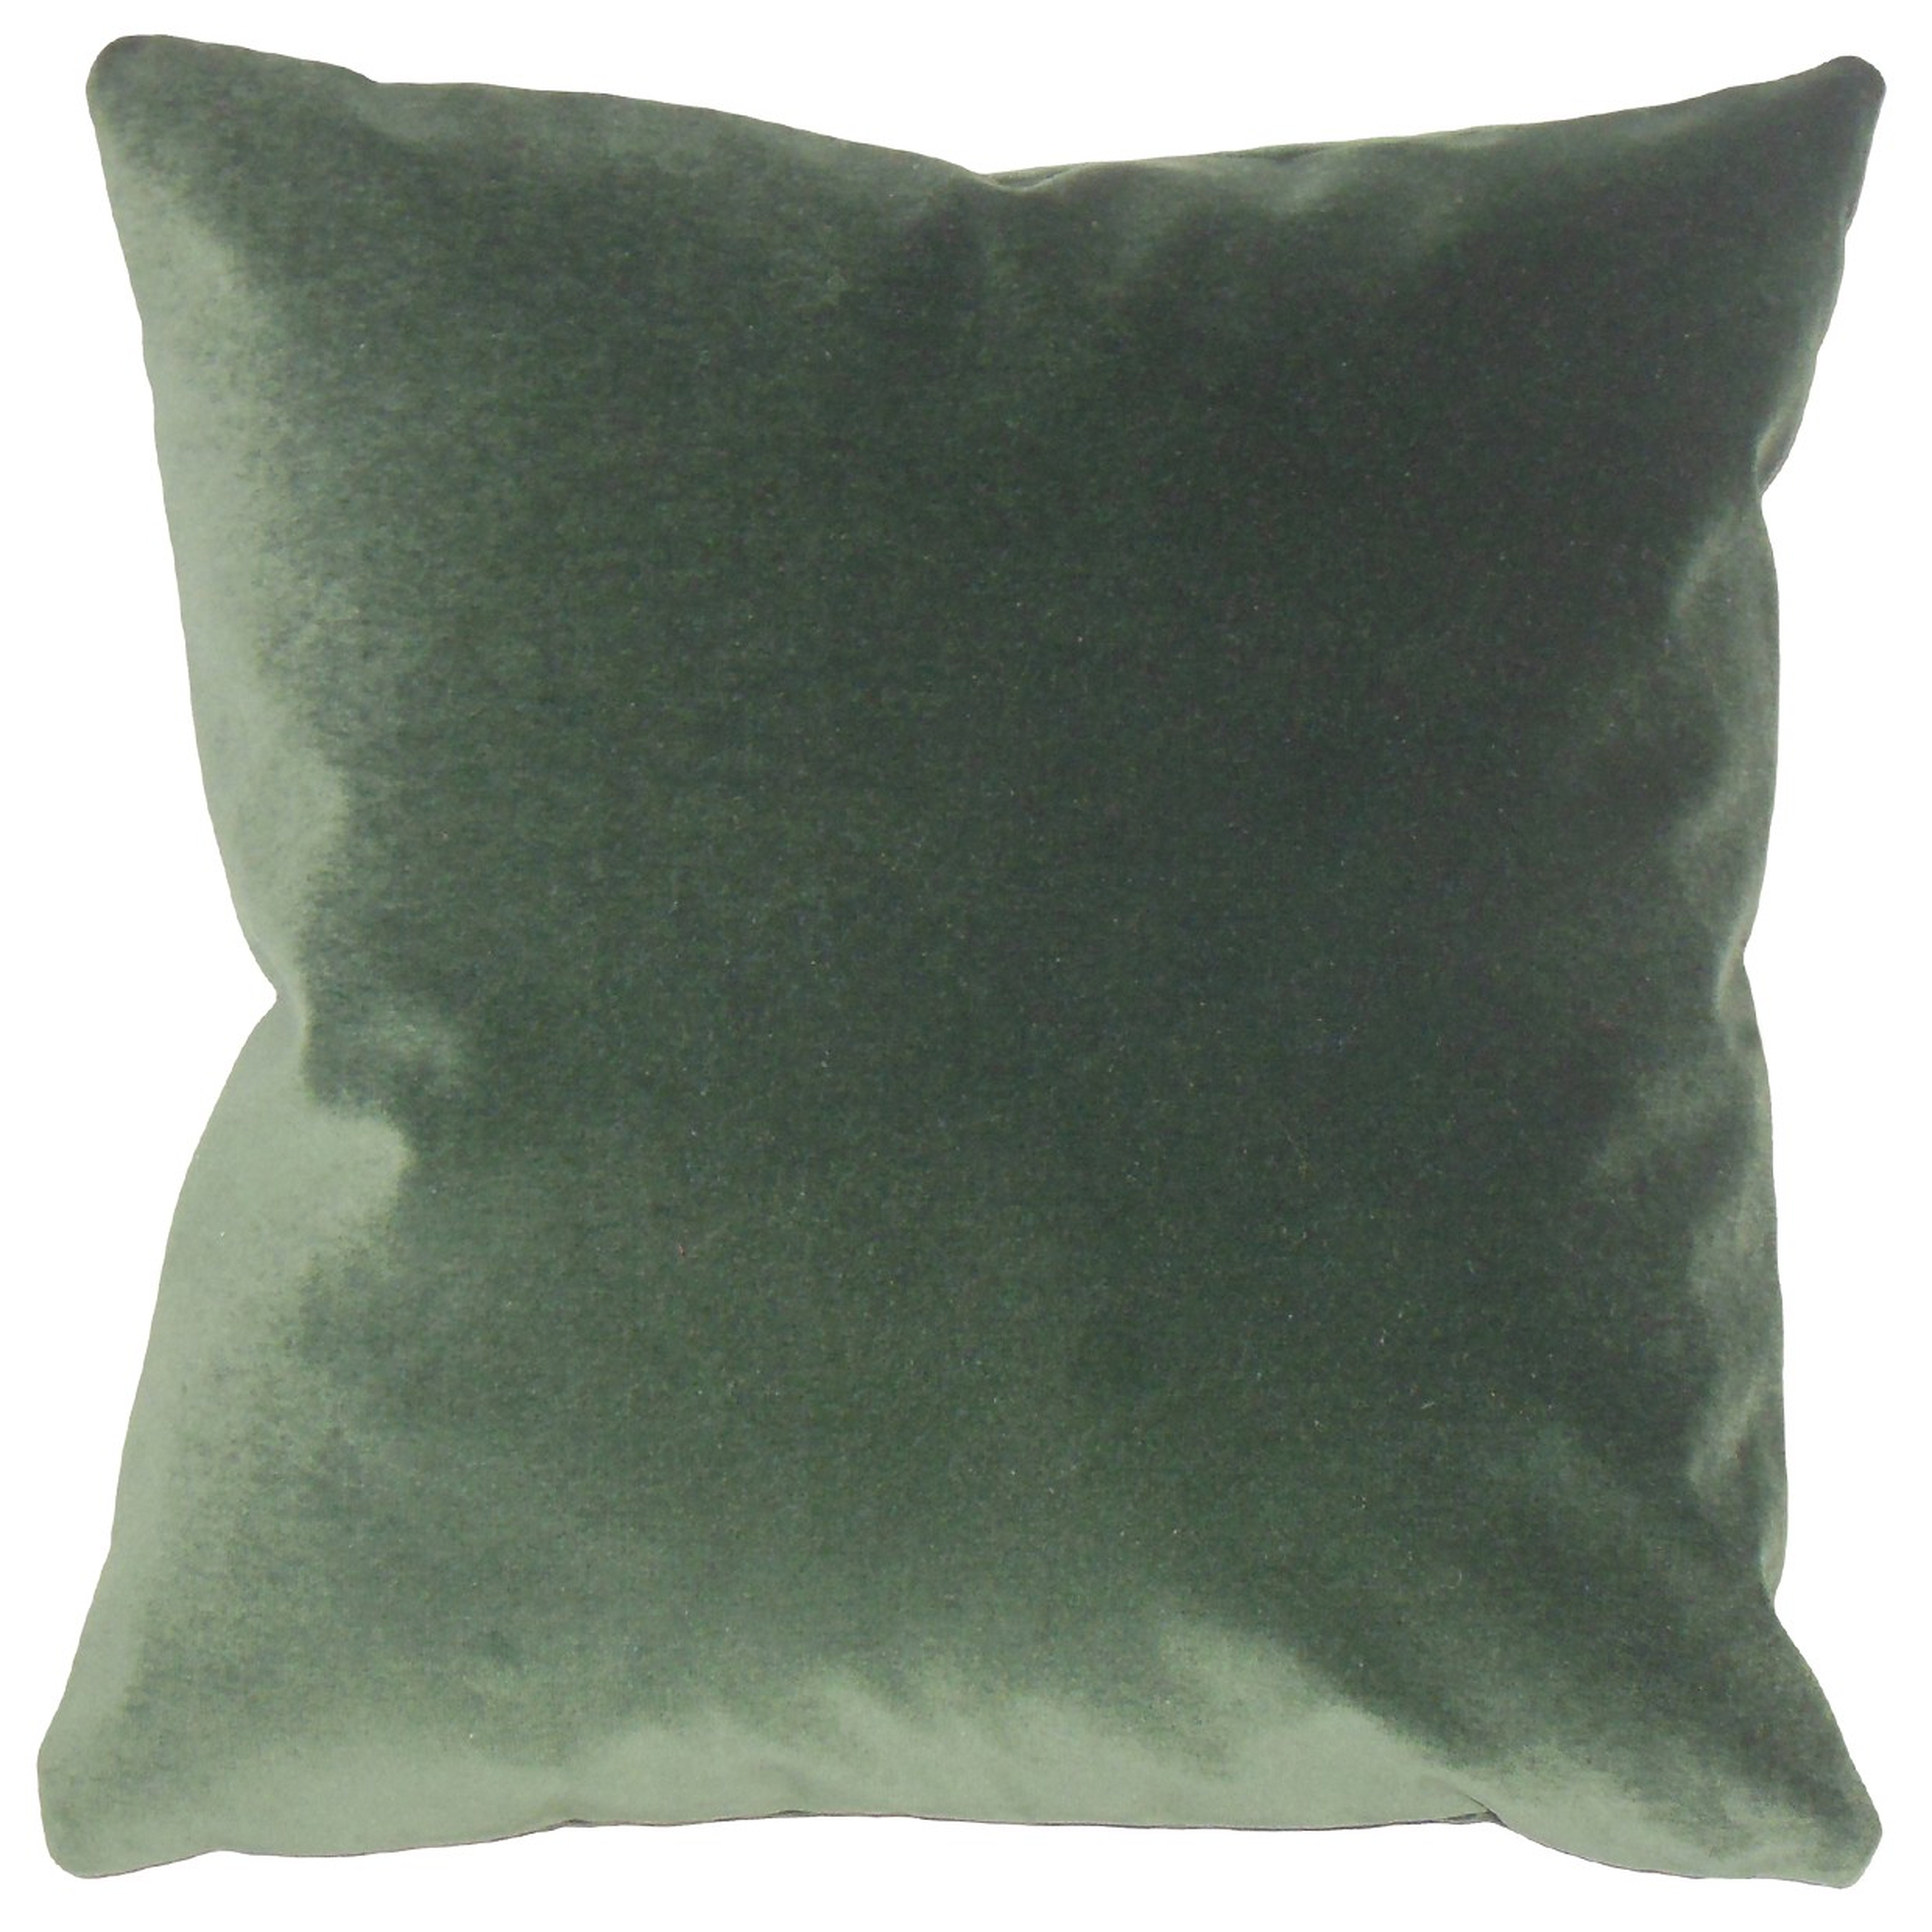 Wish Holiday Pillow Green - Euro Sham Cover Only - Linen & Seam